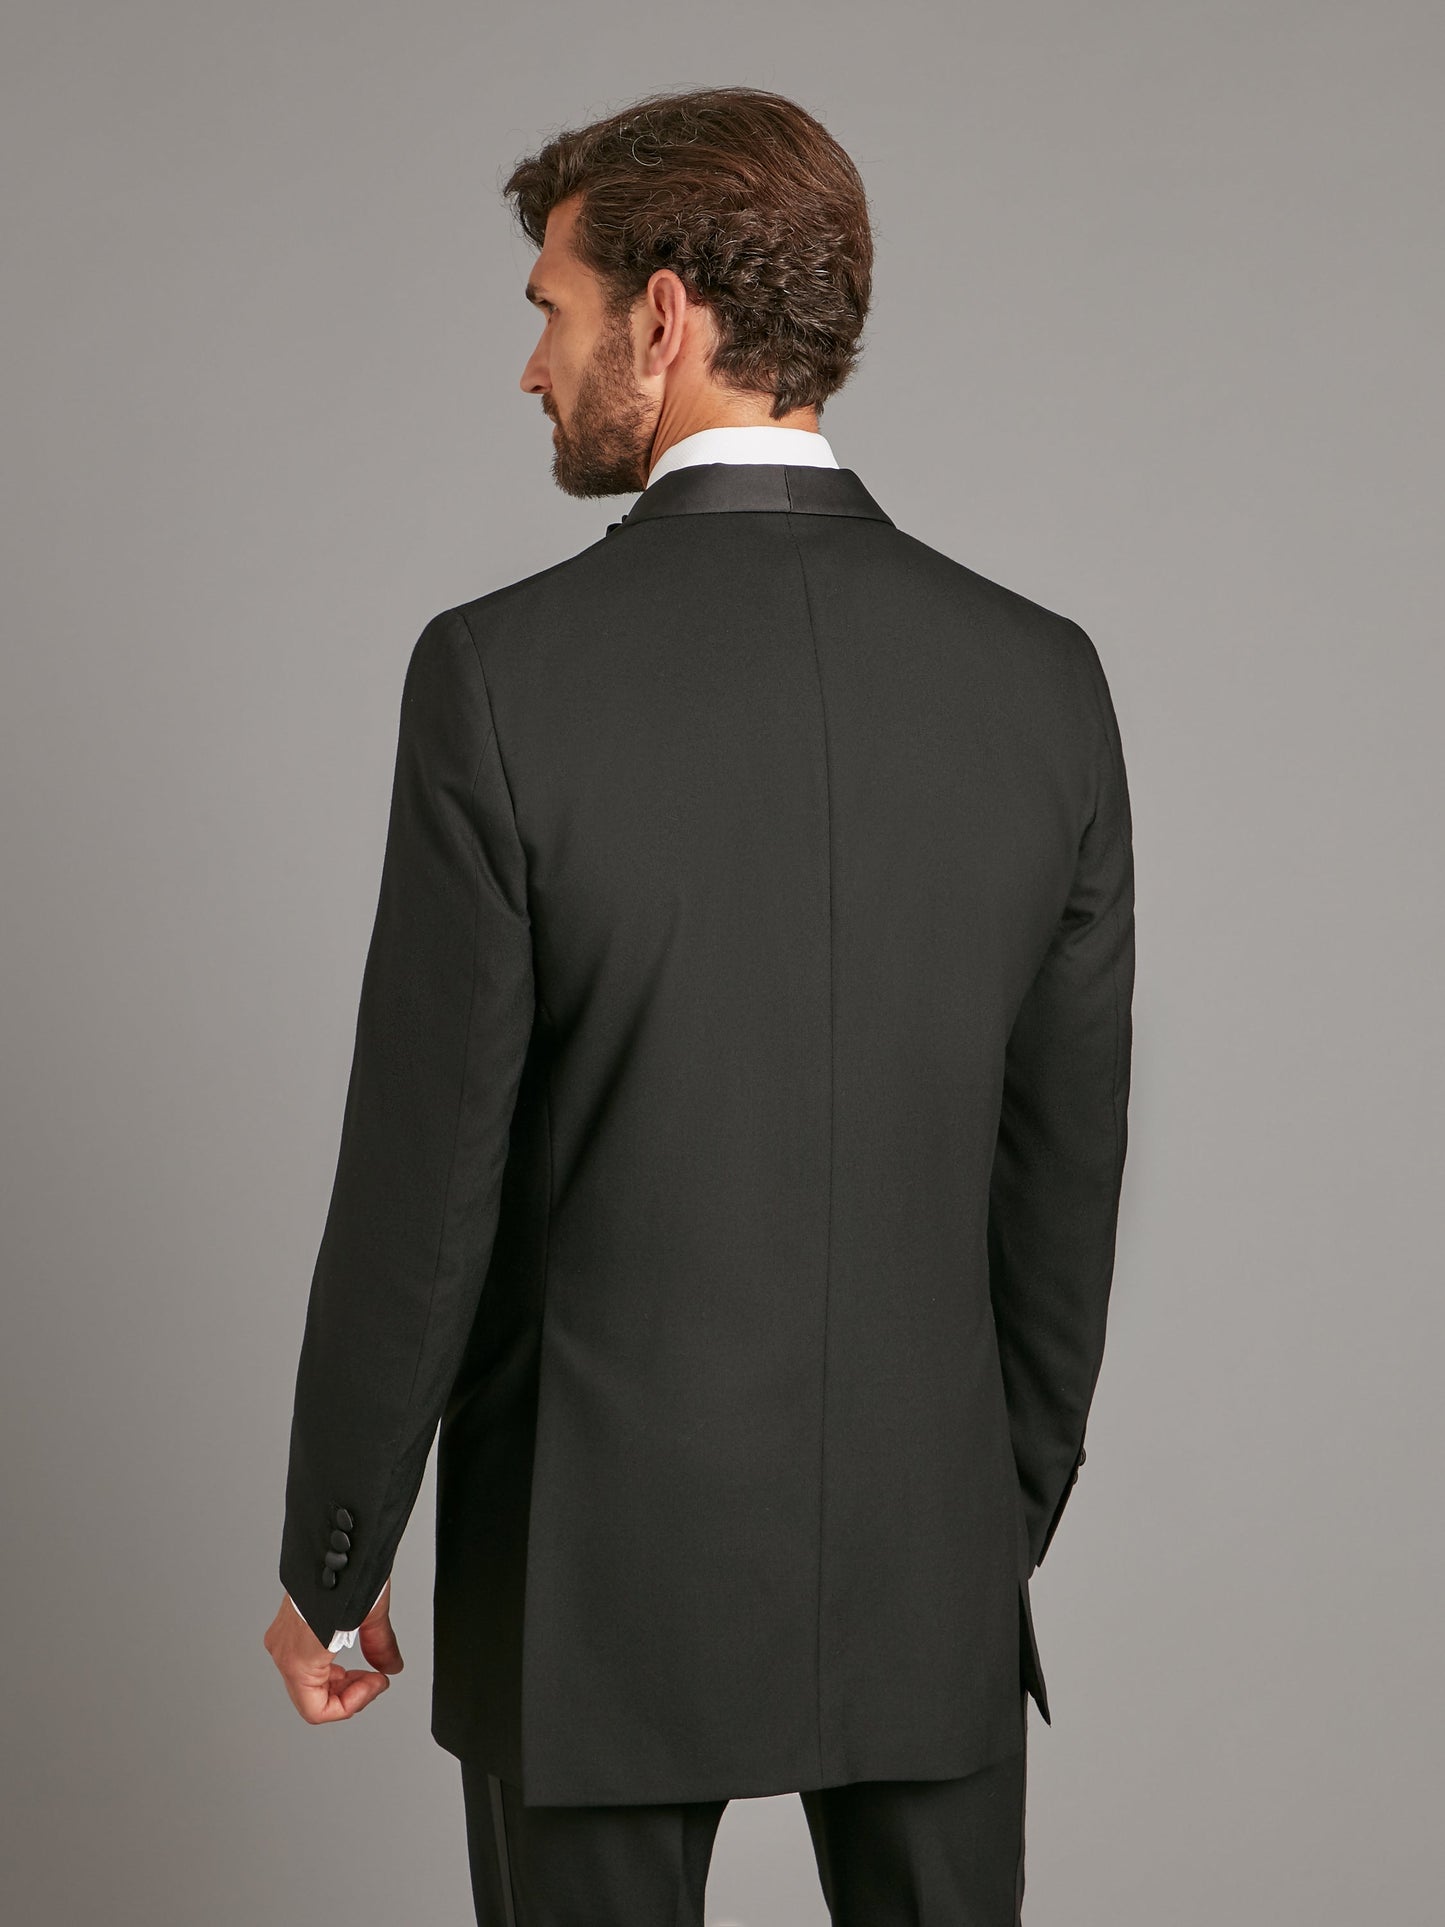 Pure Cashmere Whittaker Dinner Suit - Black